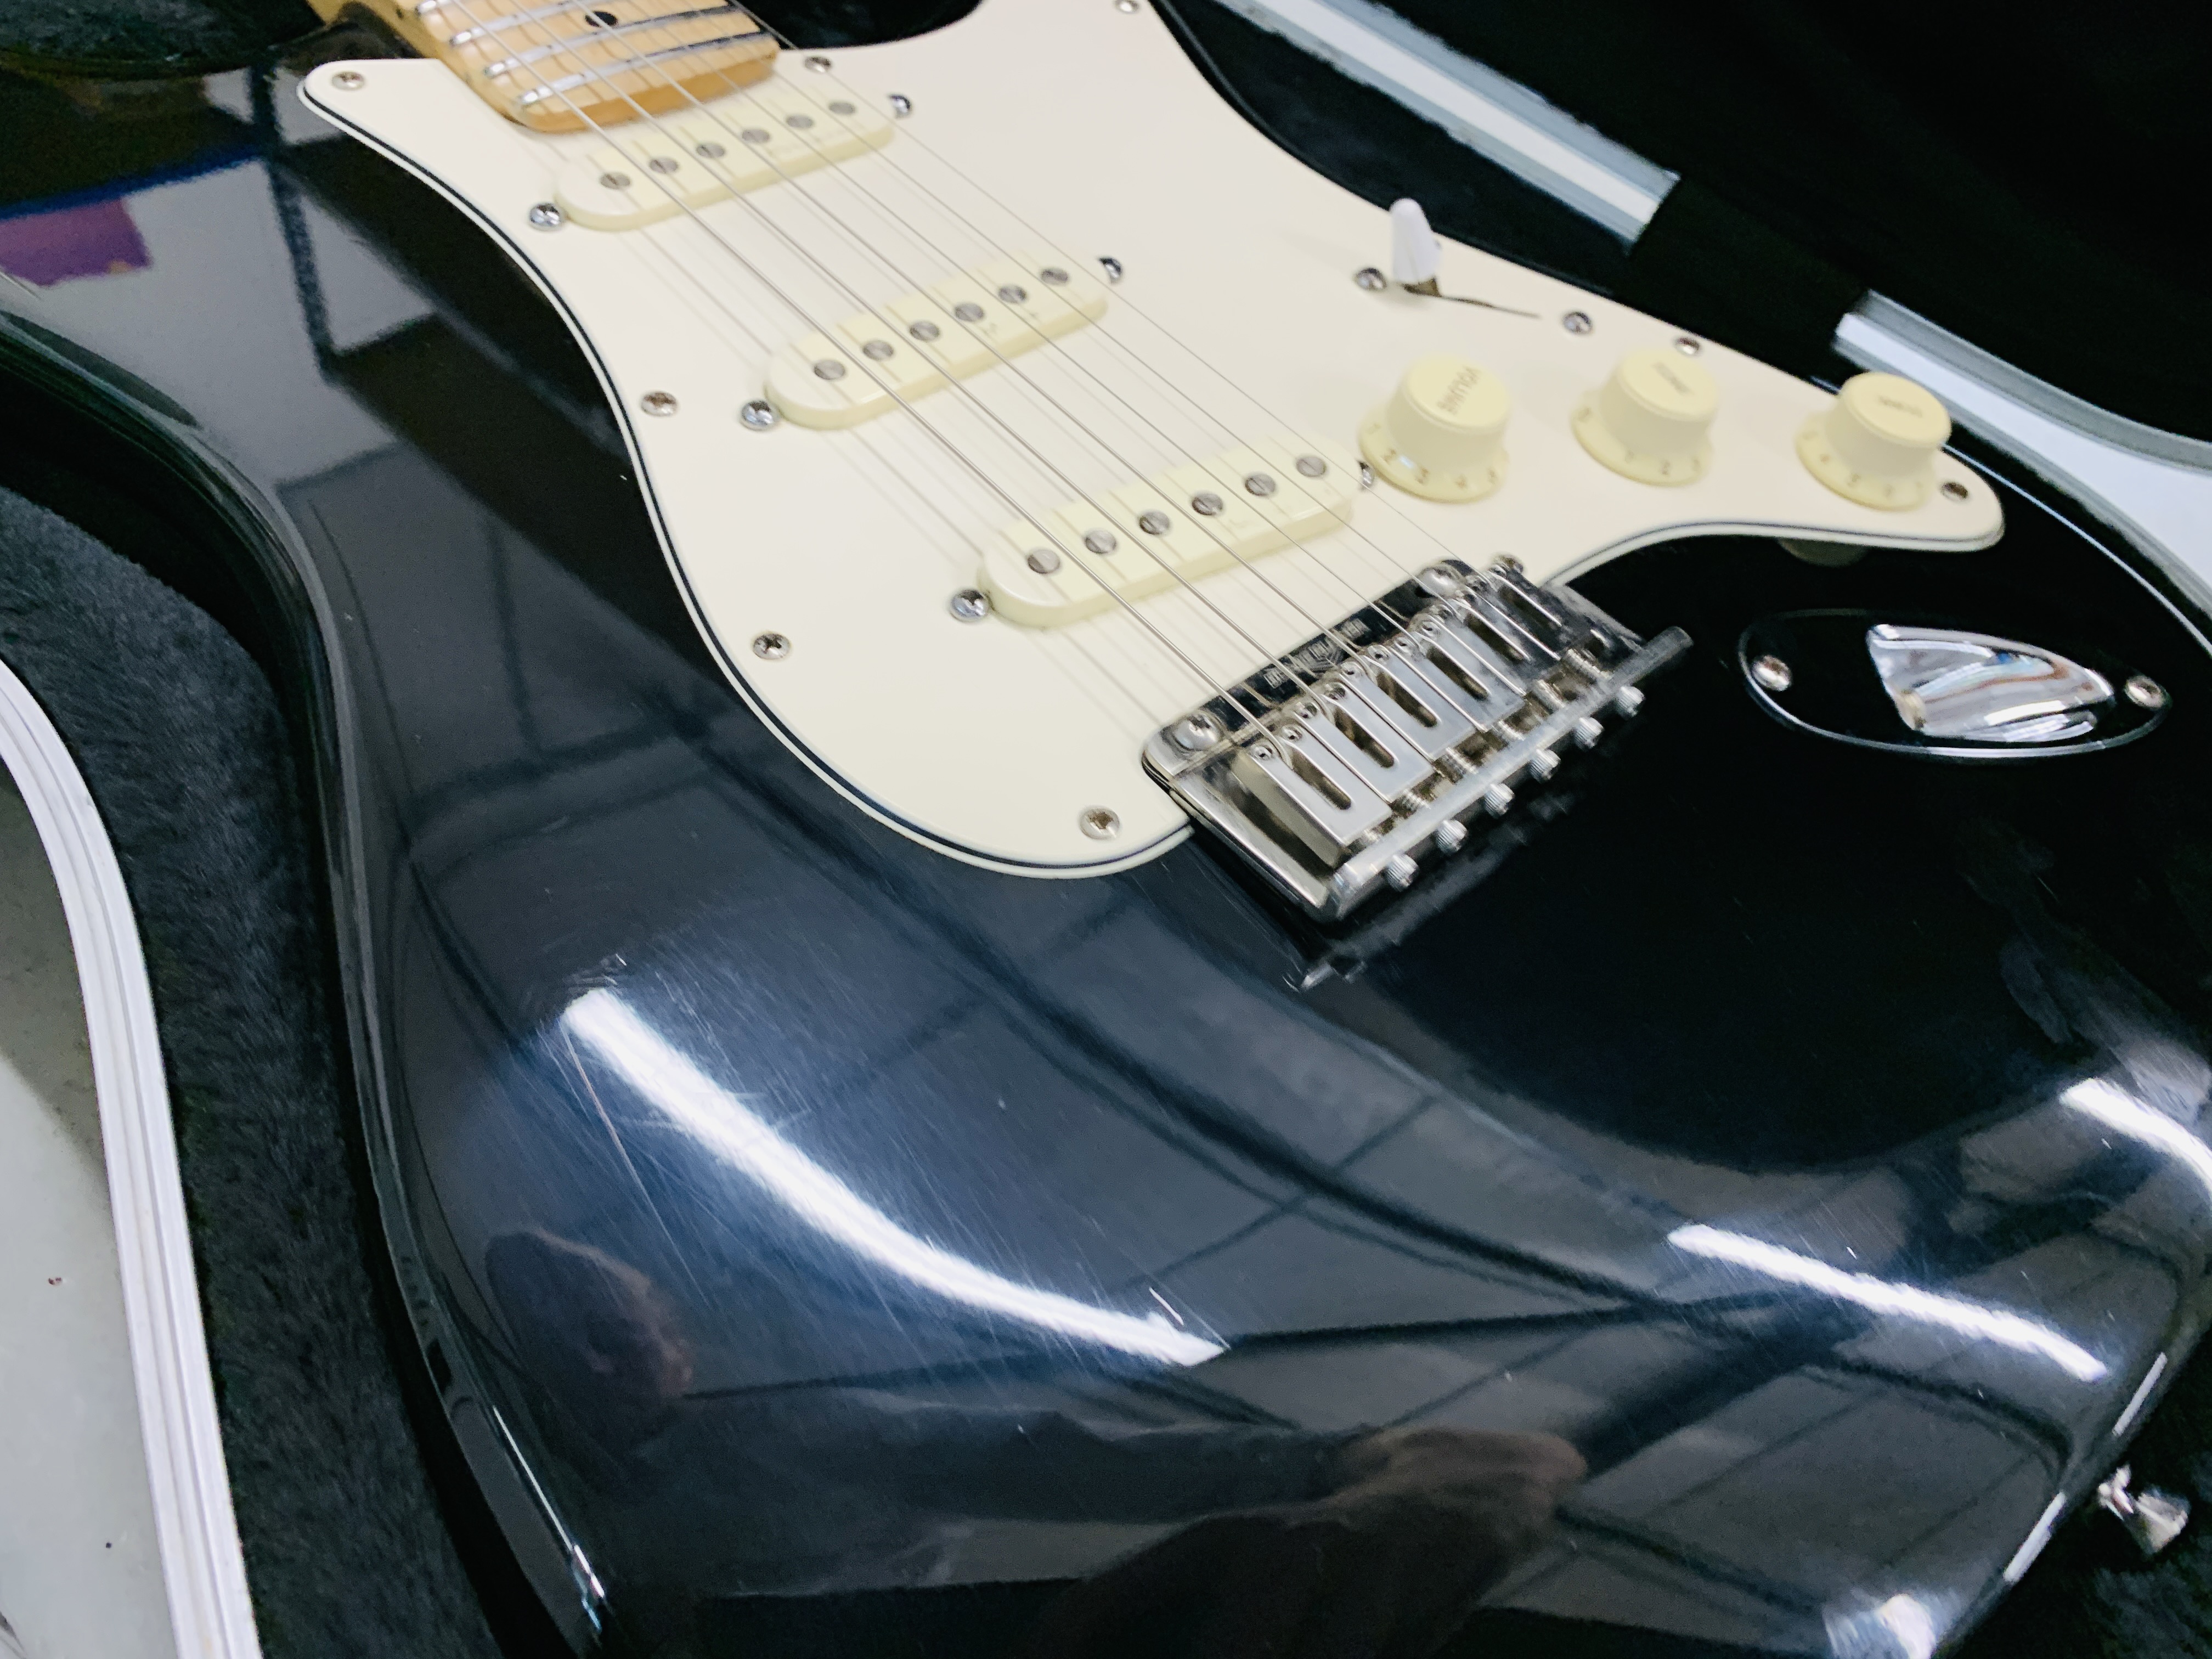 1 X UPGRADED USA FENDER STRATOCASTER GUITAR. - Image 6 of 10